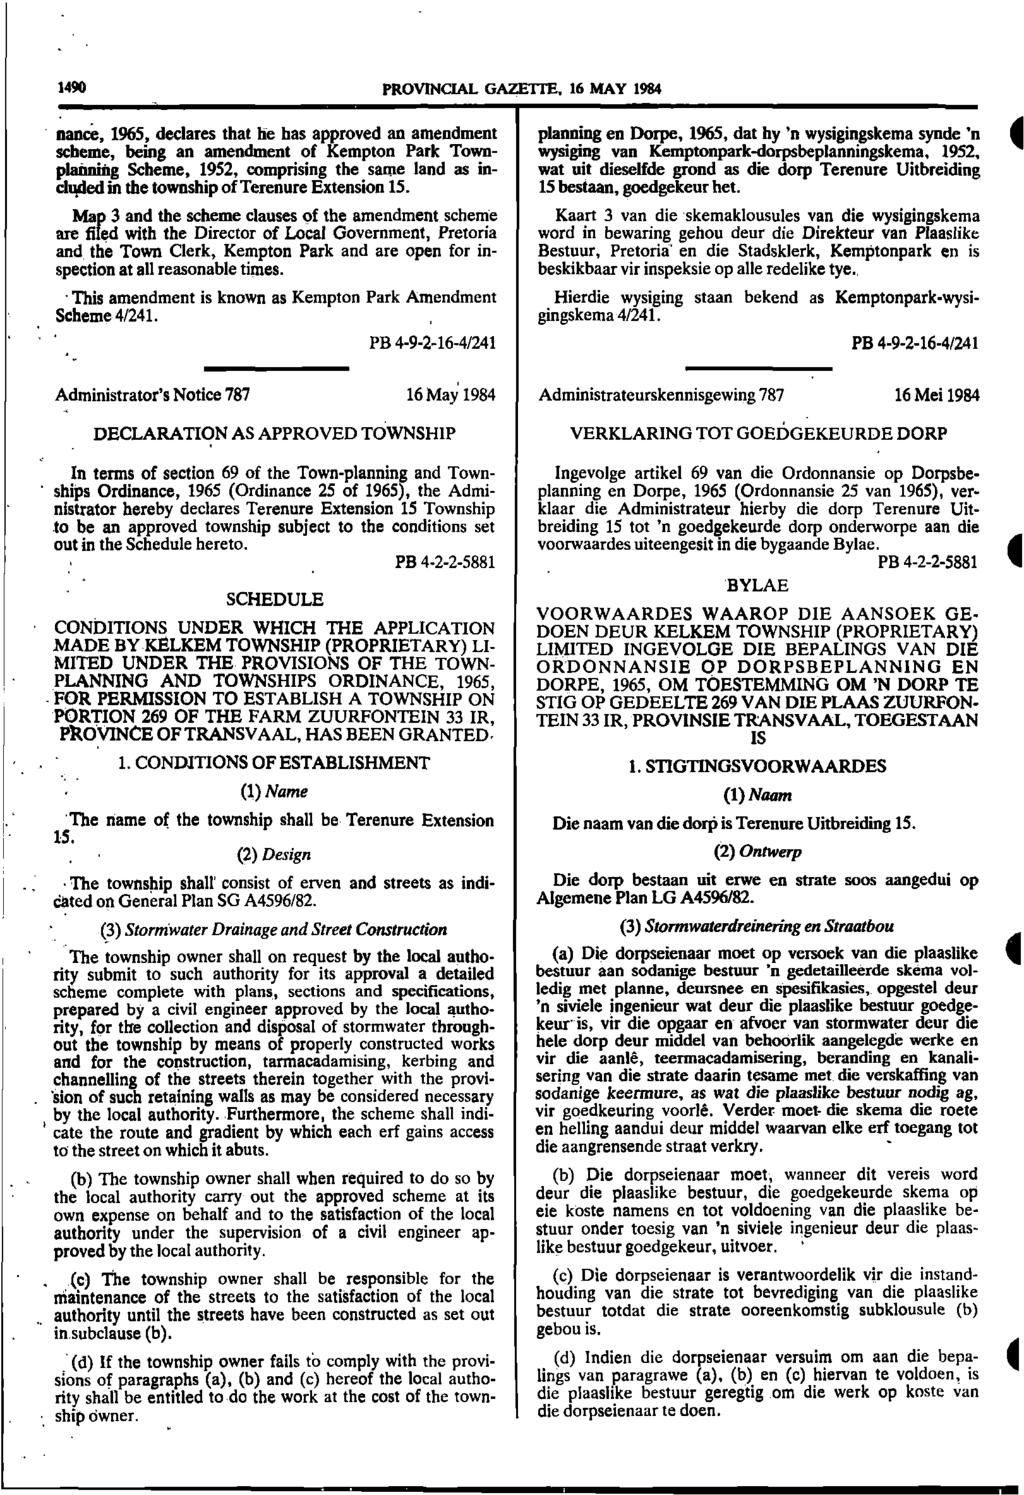 1490 PROVINCIAL GAZETTE, 16 MAY 1984 nance, 1965, declares that he has approved an amendment scheme, being an amendment of Kempton Park Townplanning Scheme, 1952, comprising the same land as included